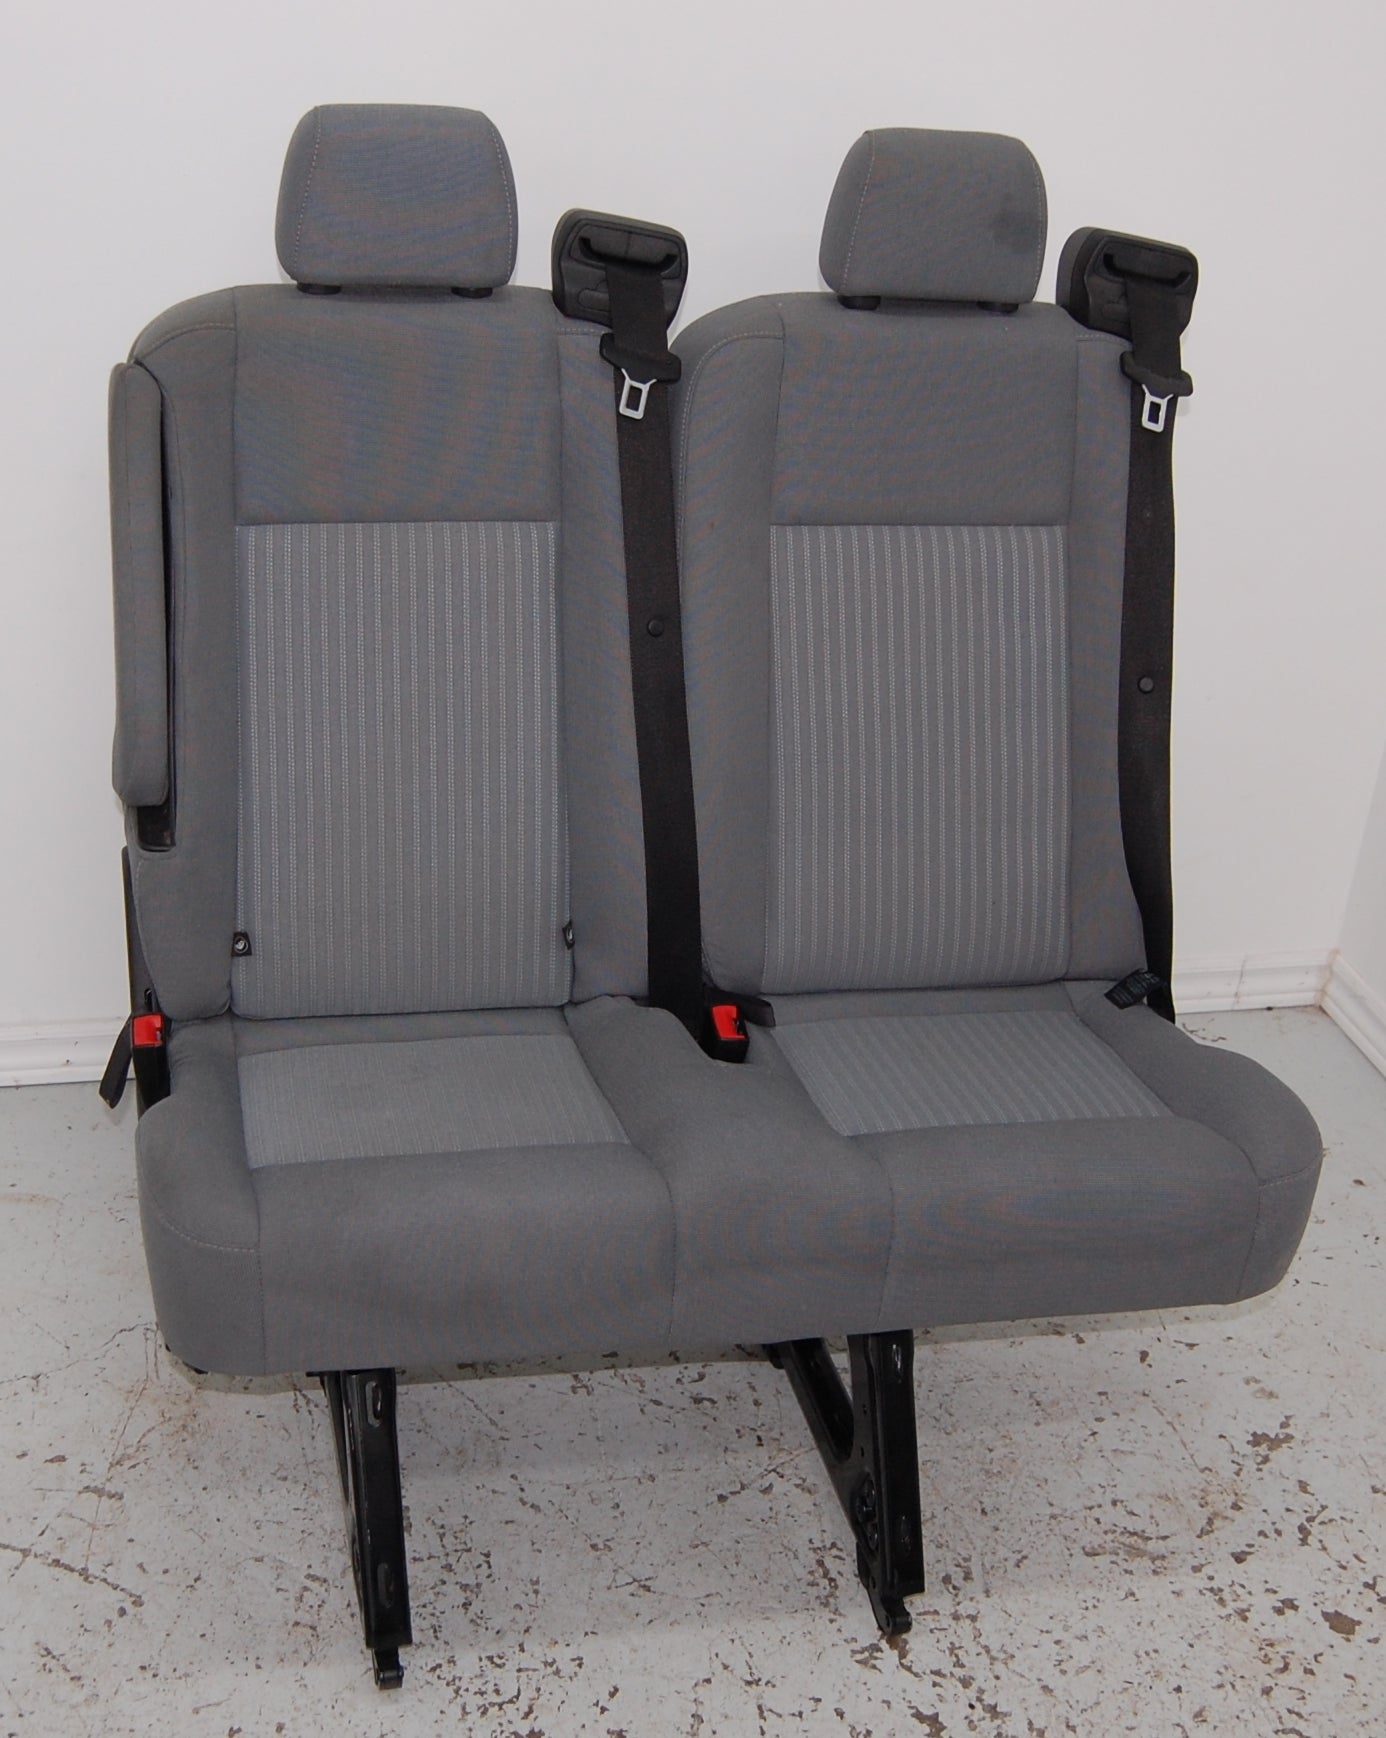 Overstock SALE!! Now...$885.00 Ford Transit Passenger Van 2018 Grey Cloth Removeable Two Person 36 inch Double Bench Jump Seat Savanna Express Truck VANLIFE Cargo Camper Express